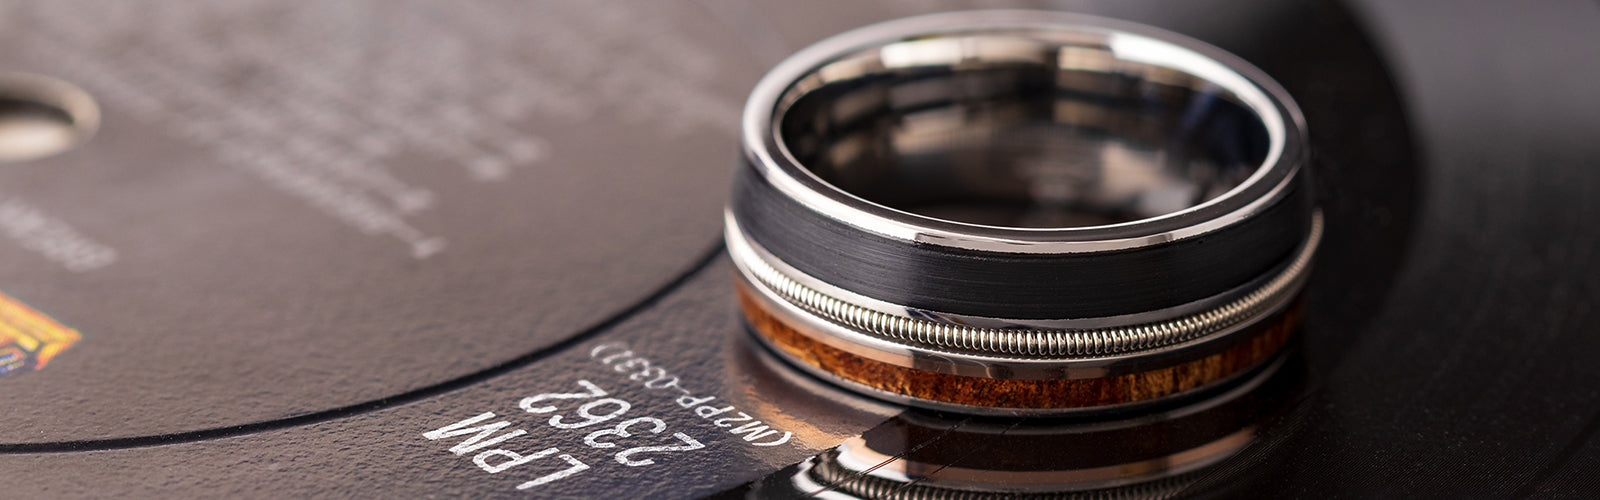 Men's Wedding Band with Guitar String